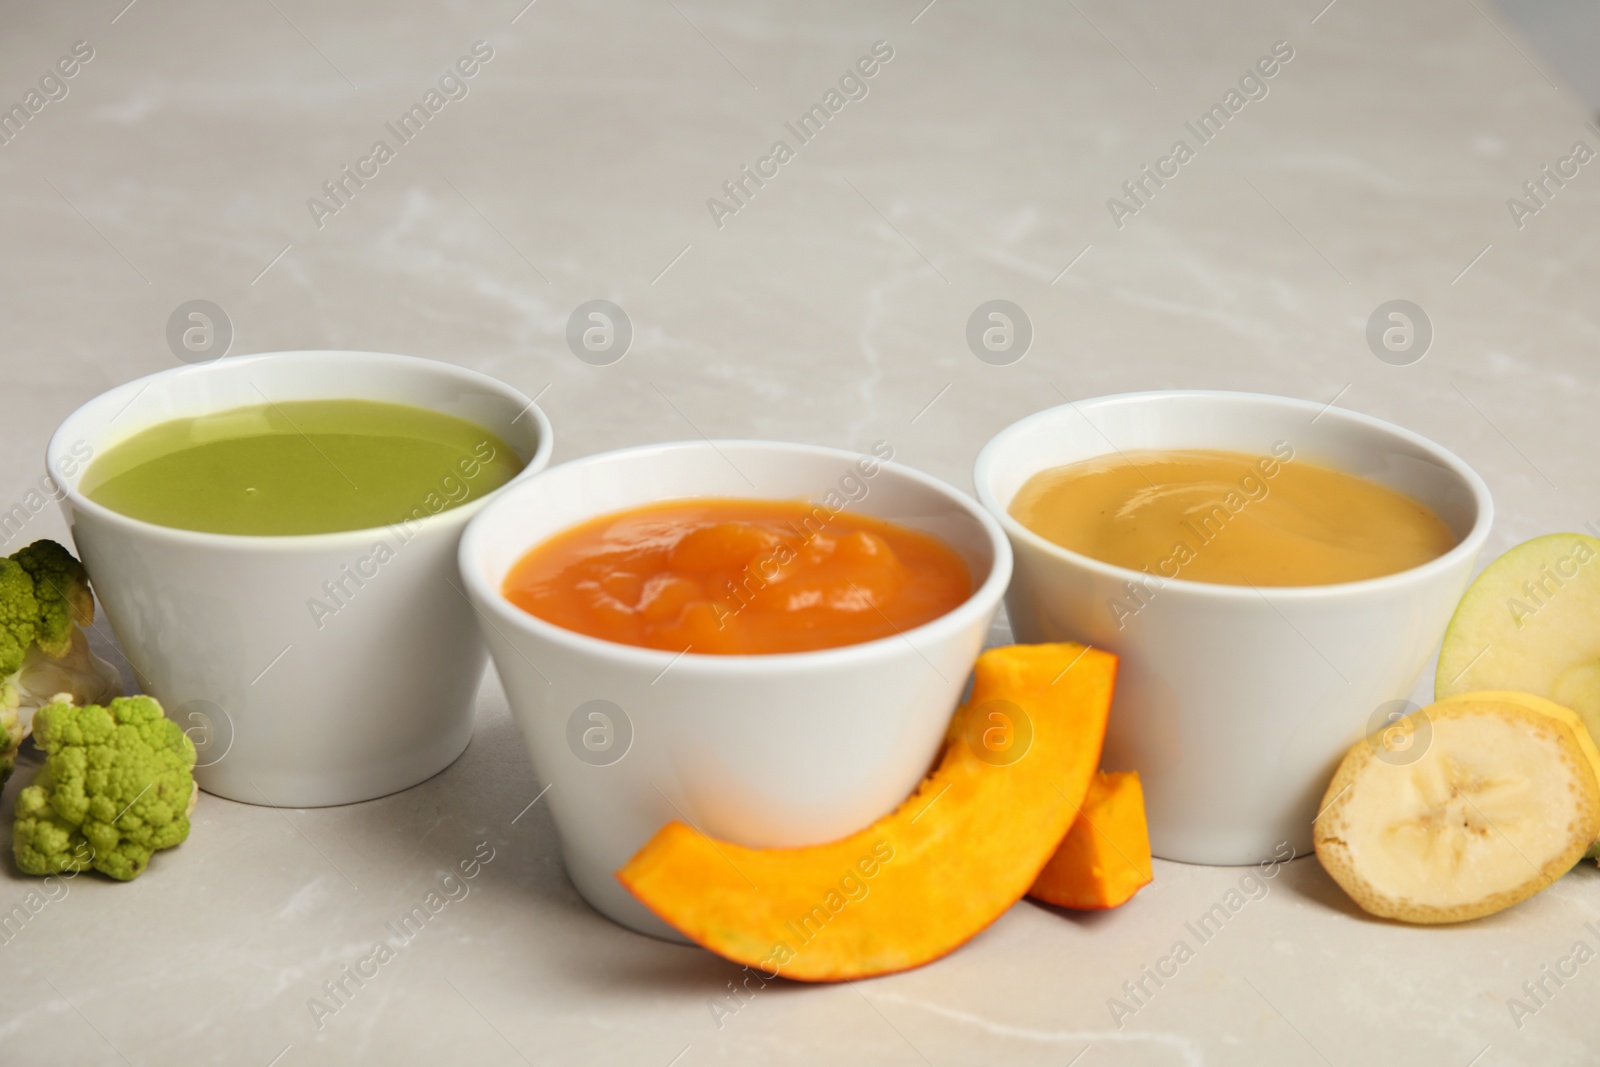 Photo of Bowls with different baby food on gray background